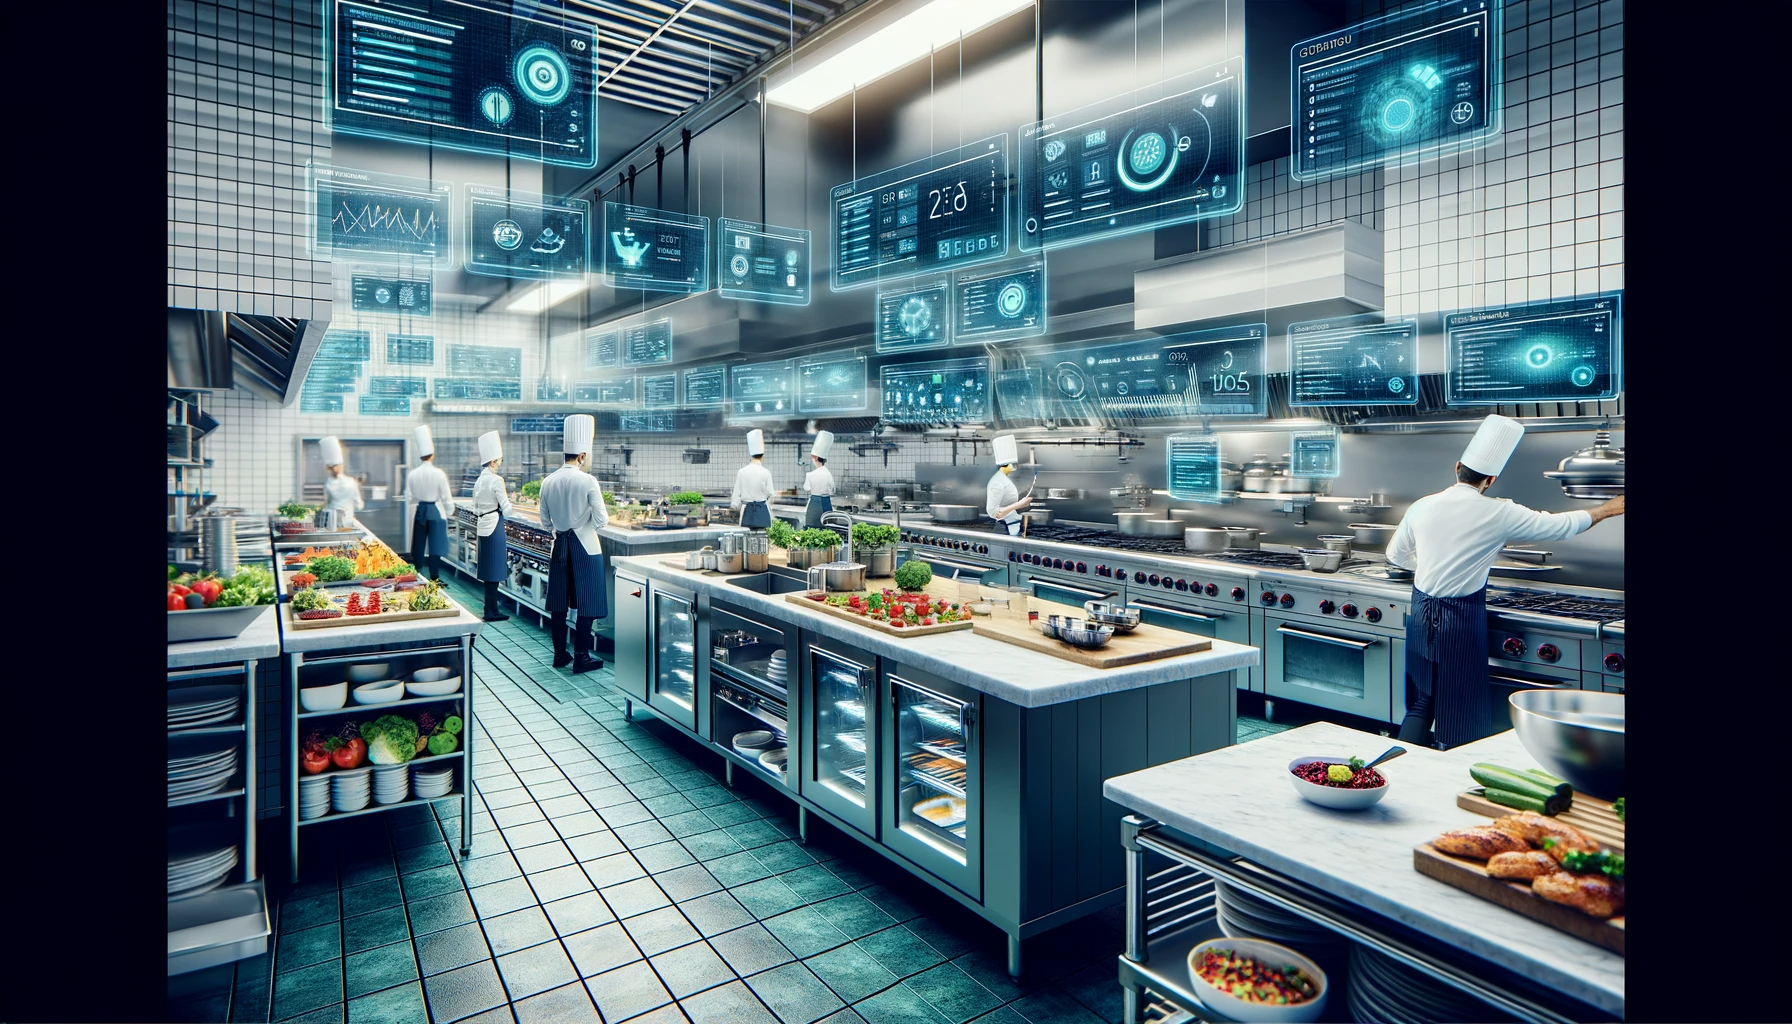 DALL·E 2023-12-12 19.43.02 - A modern, professional kitchen in a hotel or restaurant, showcasing advanced digital food management technology. The kitchen is equipped with digital 